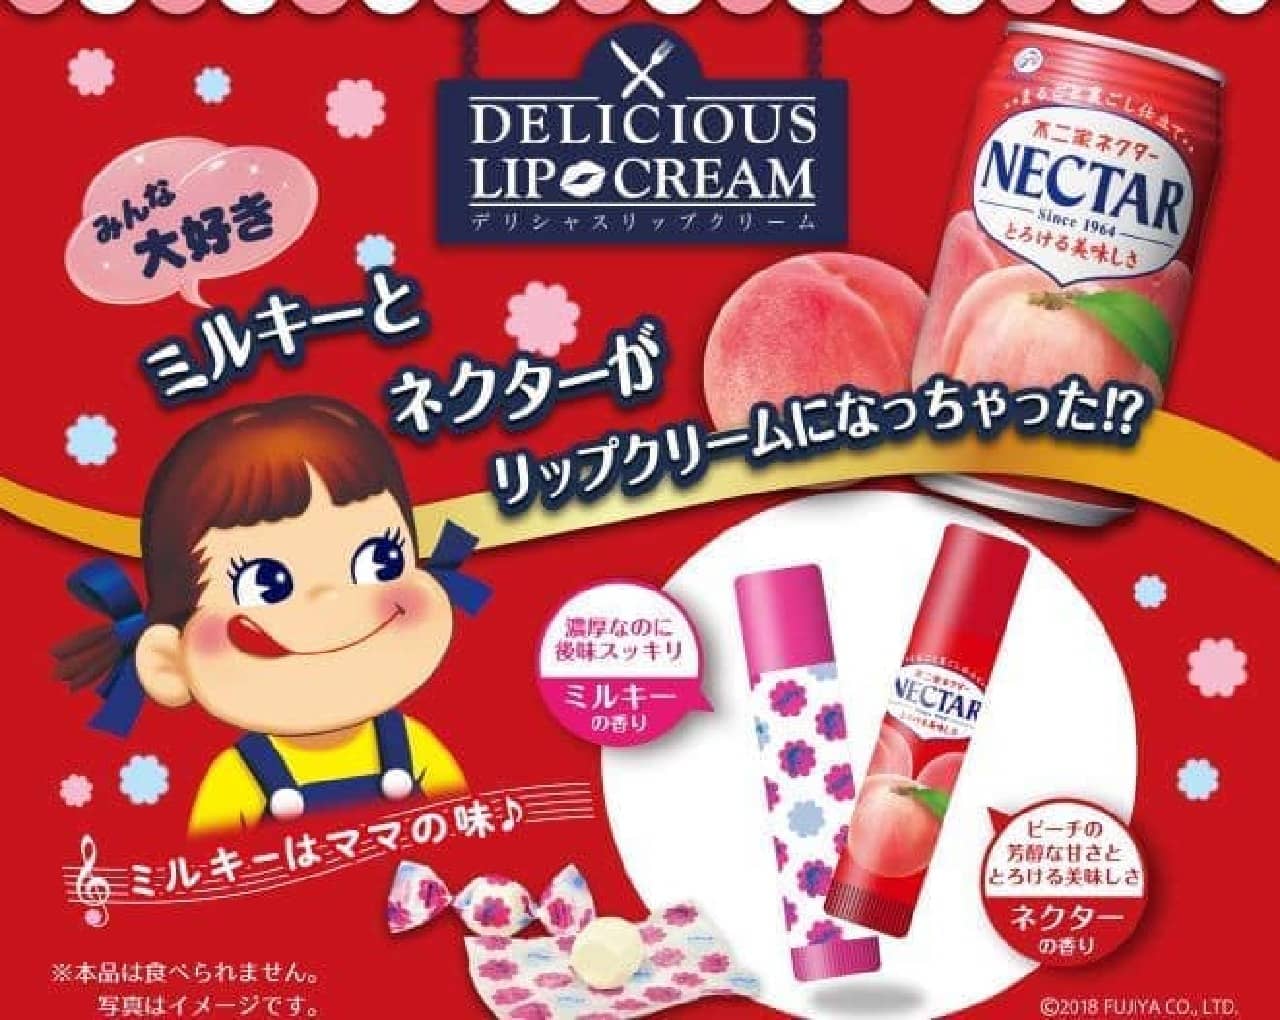 "Delicious Lip" new "Milky" and "Nectar"